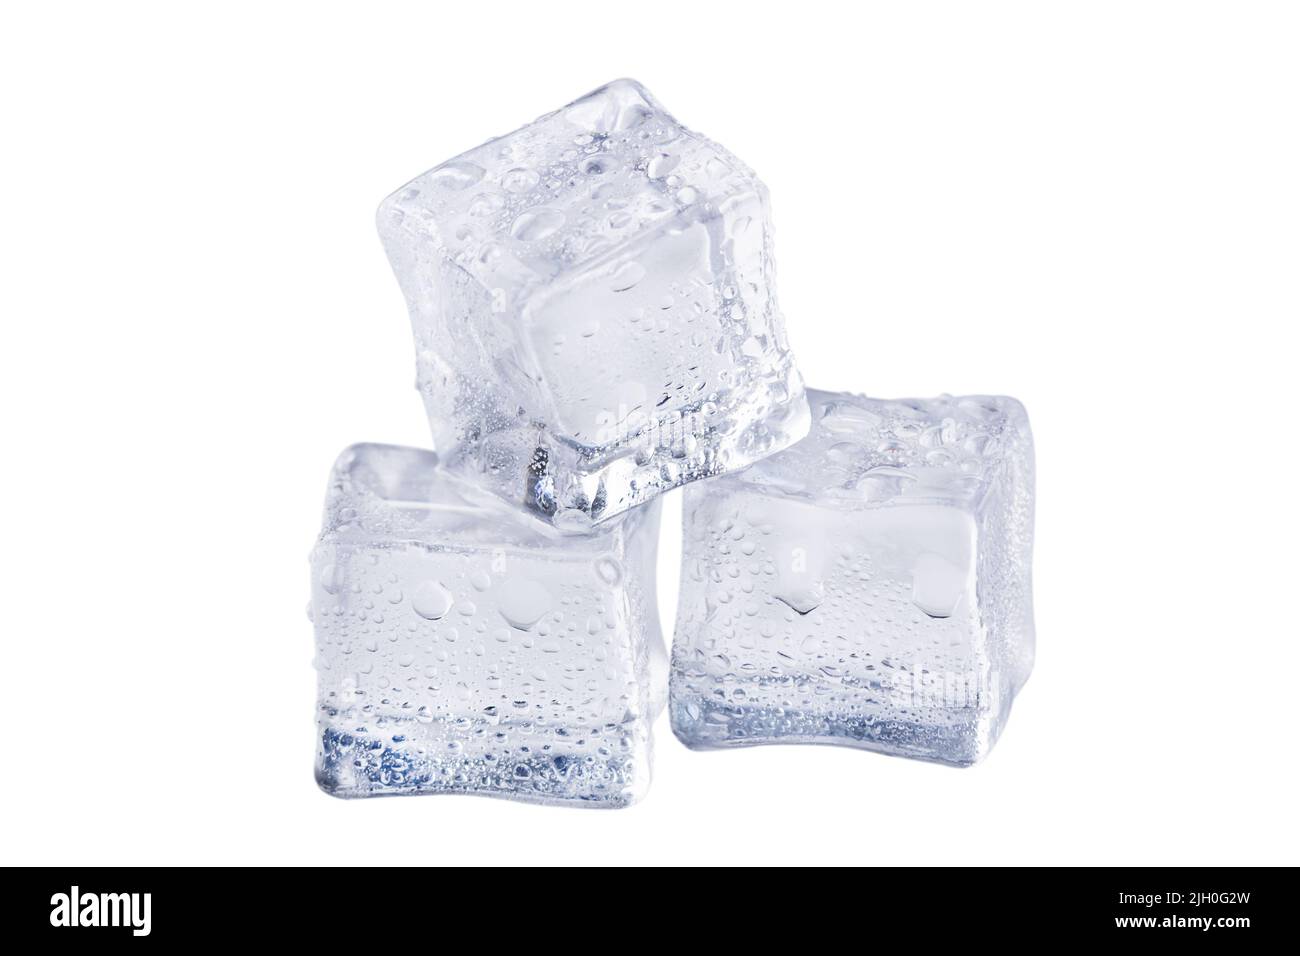 top view of cool frozen ice cubes isolated on black, Stock image